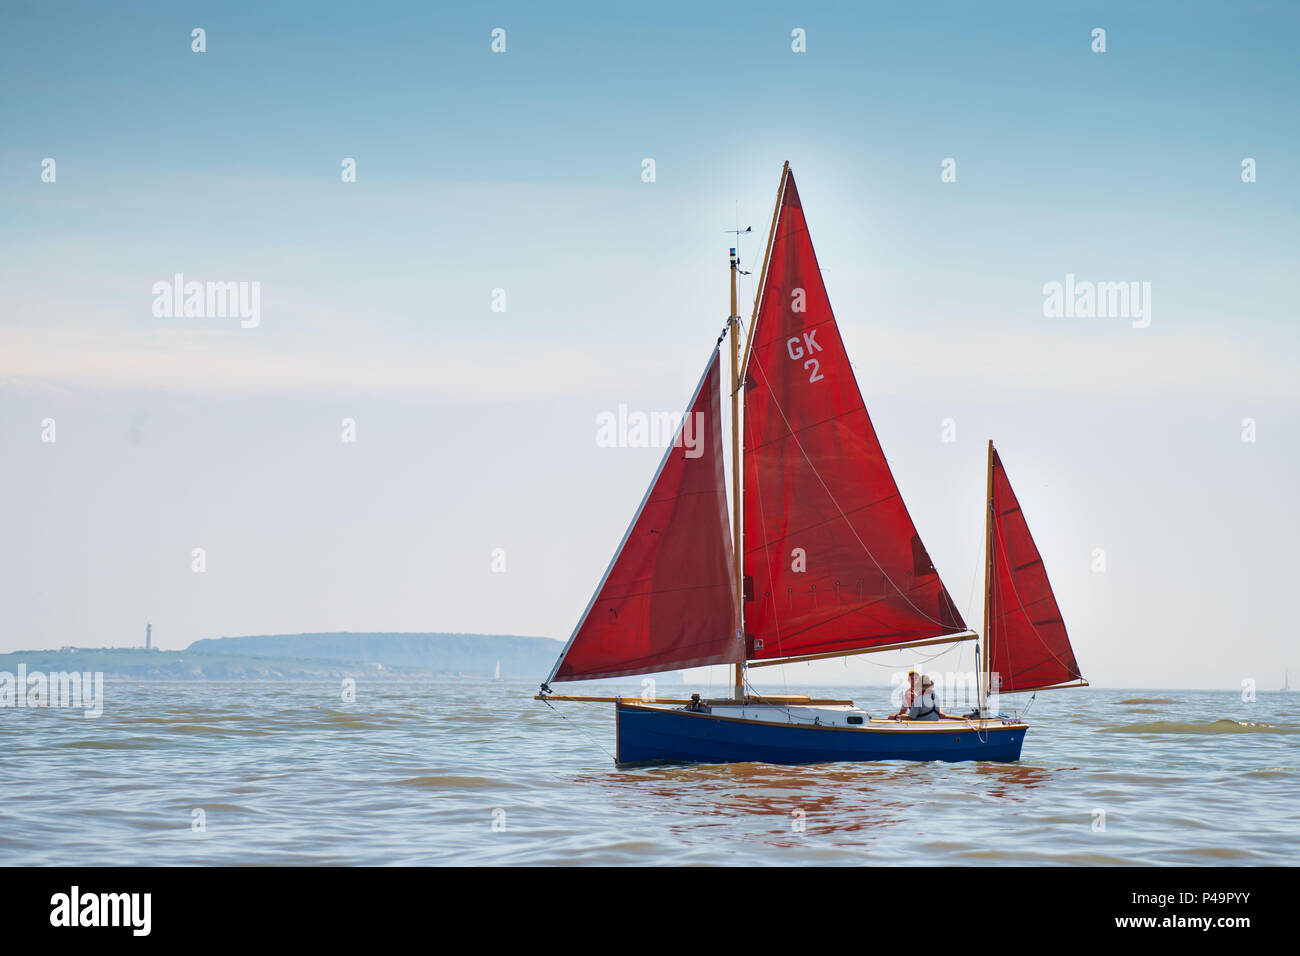 A red sailboat seen on calm sea on a warm sunny day with blue sky. Stock Photo